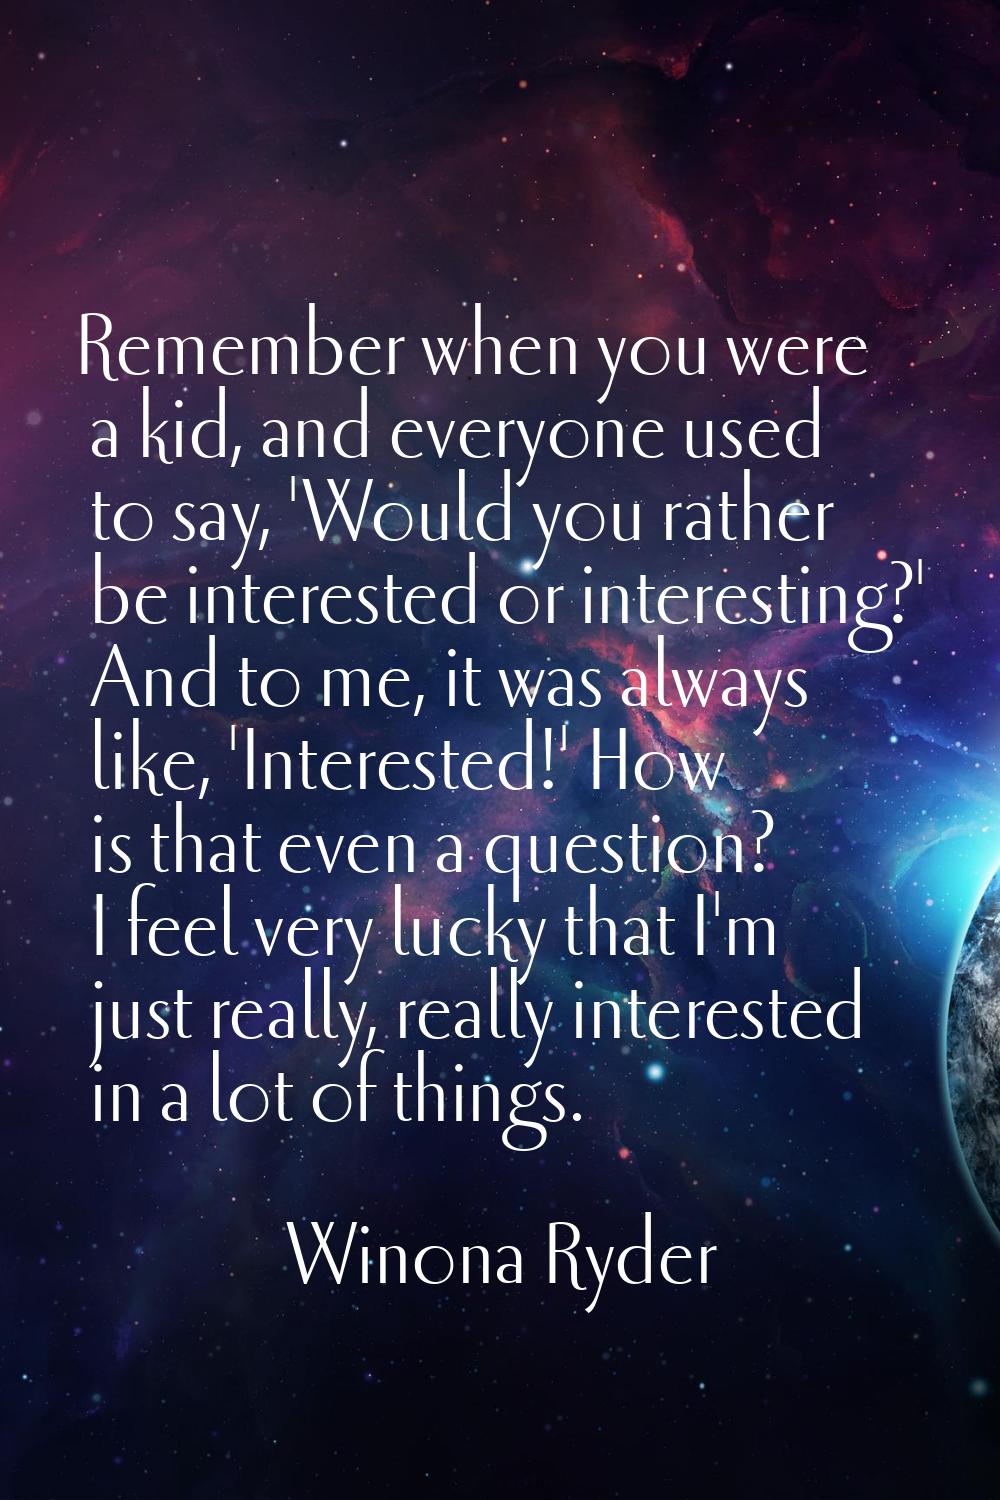 Remember when you were a kid, and everyone used to say, 'Would you rather be interested or interest